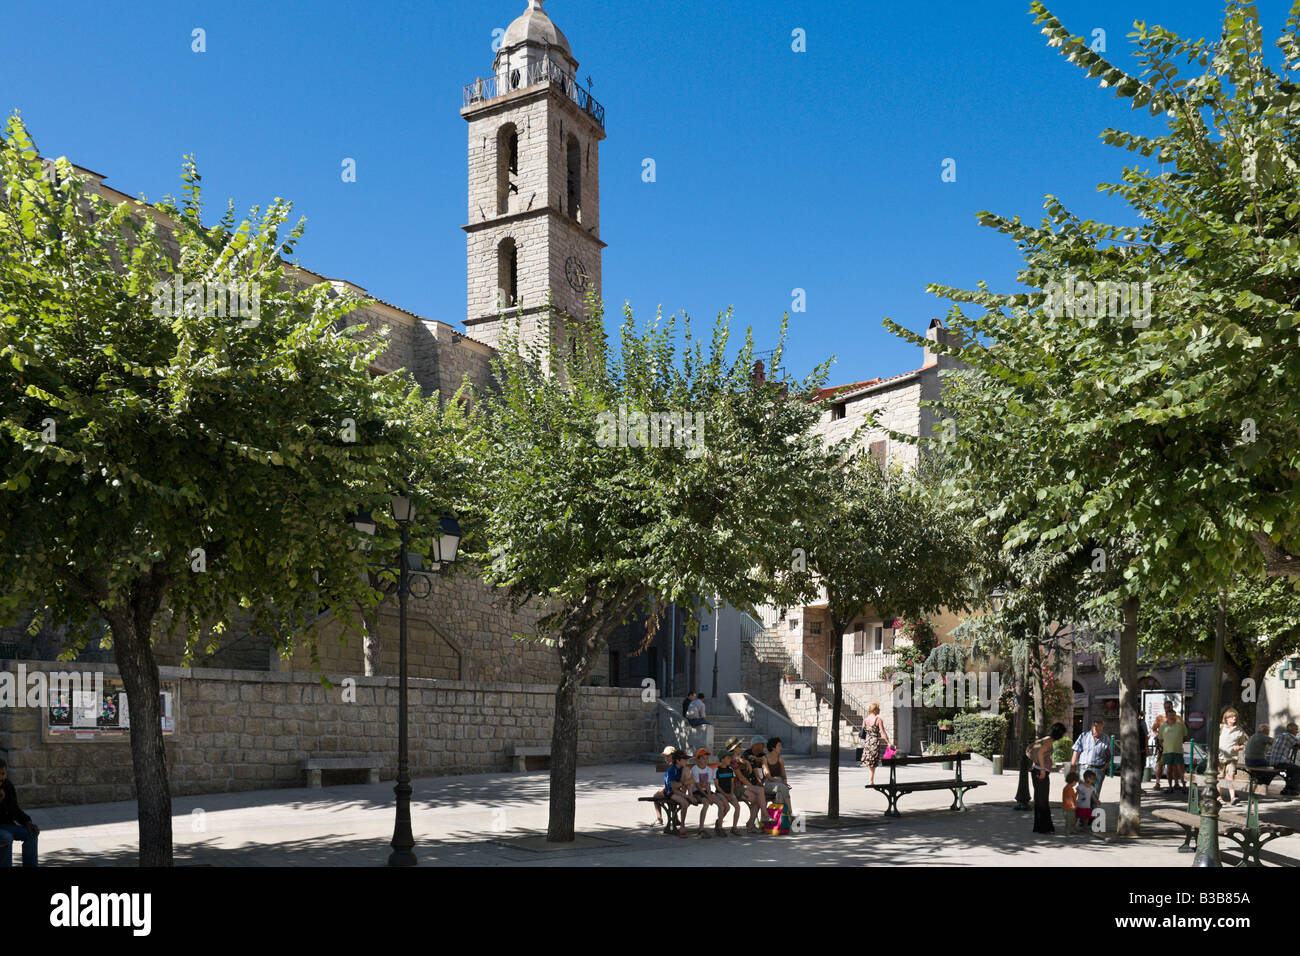 Eglise St Marie in the Place de la Liberation ( more commonly known as the Place Porta ), Sartene, Corsica, France Stock Photo